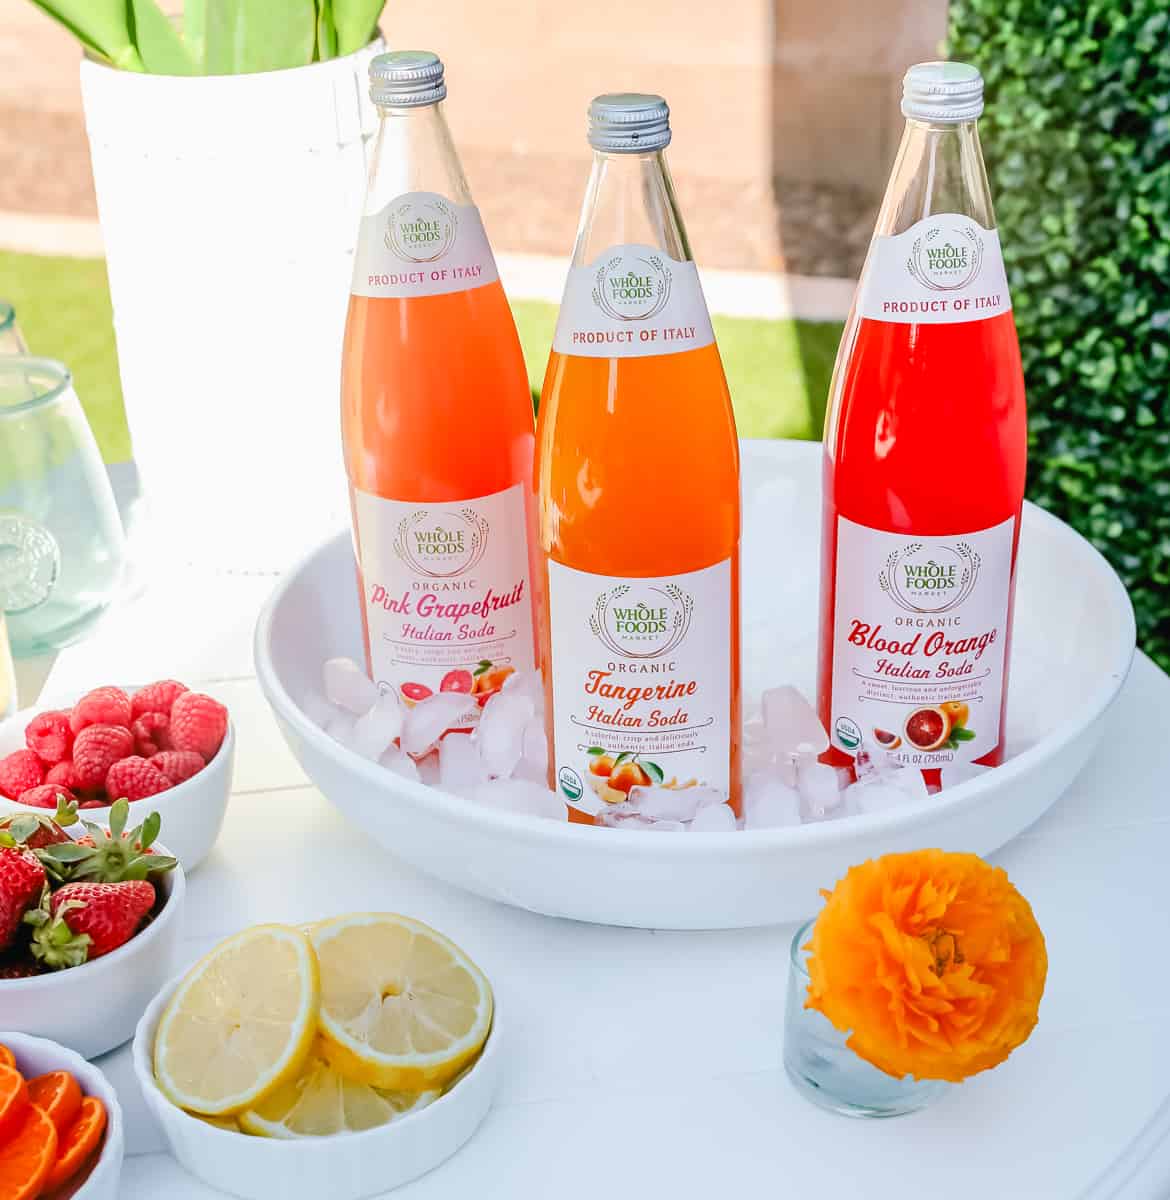 Italian Soda Drink Bar. How to create the Ultimate Spring Brunch or Spring Party with an assortment of both sweet and savory breakfast items and beautiful desserts. 30+ Spring and Easter Party Food Ideas. How to decorate for a Spring Brunch and Party too.